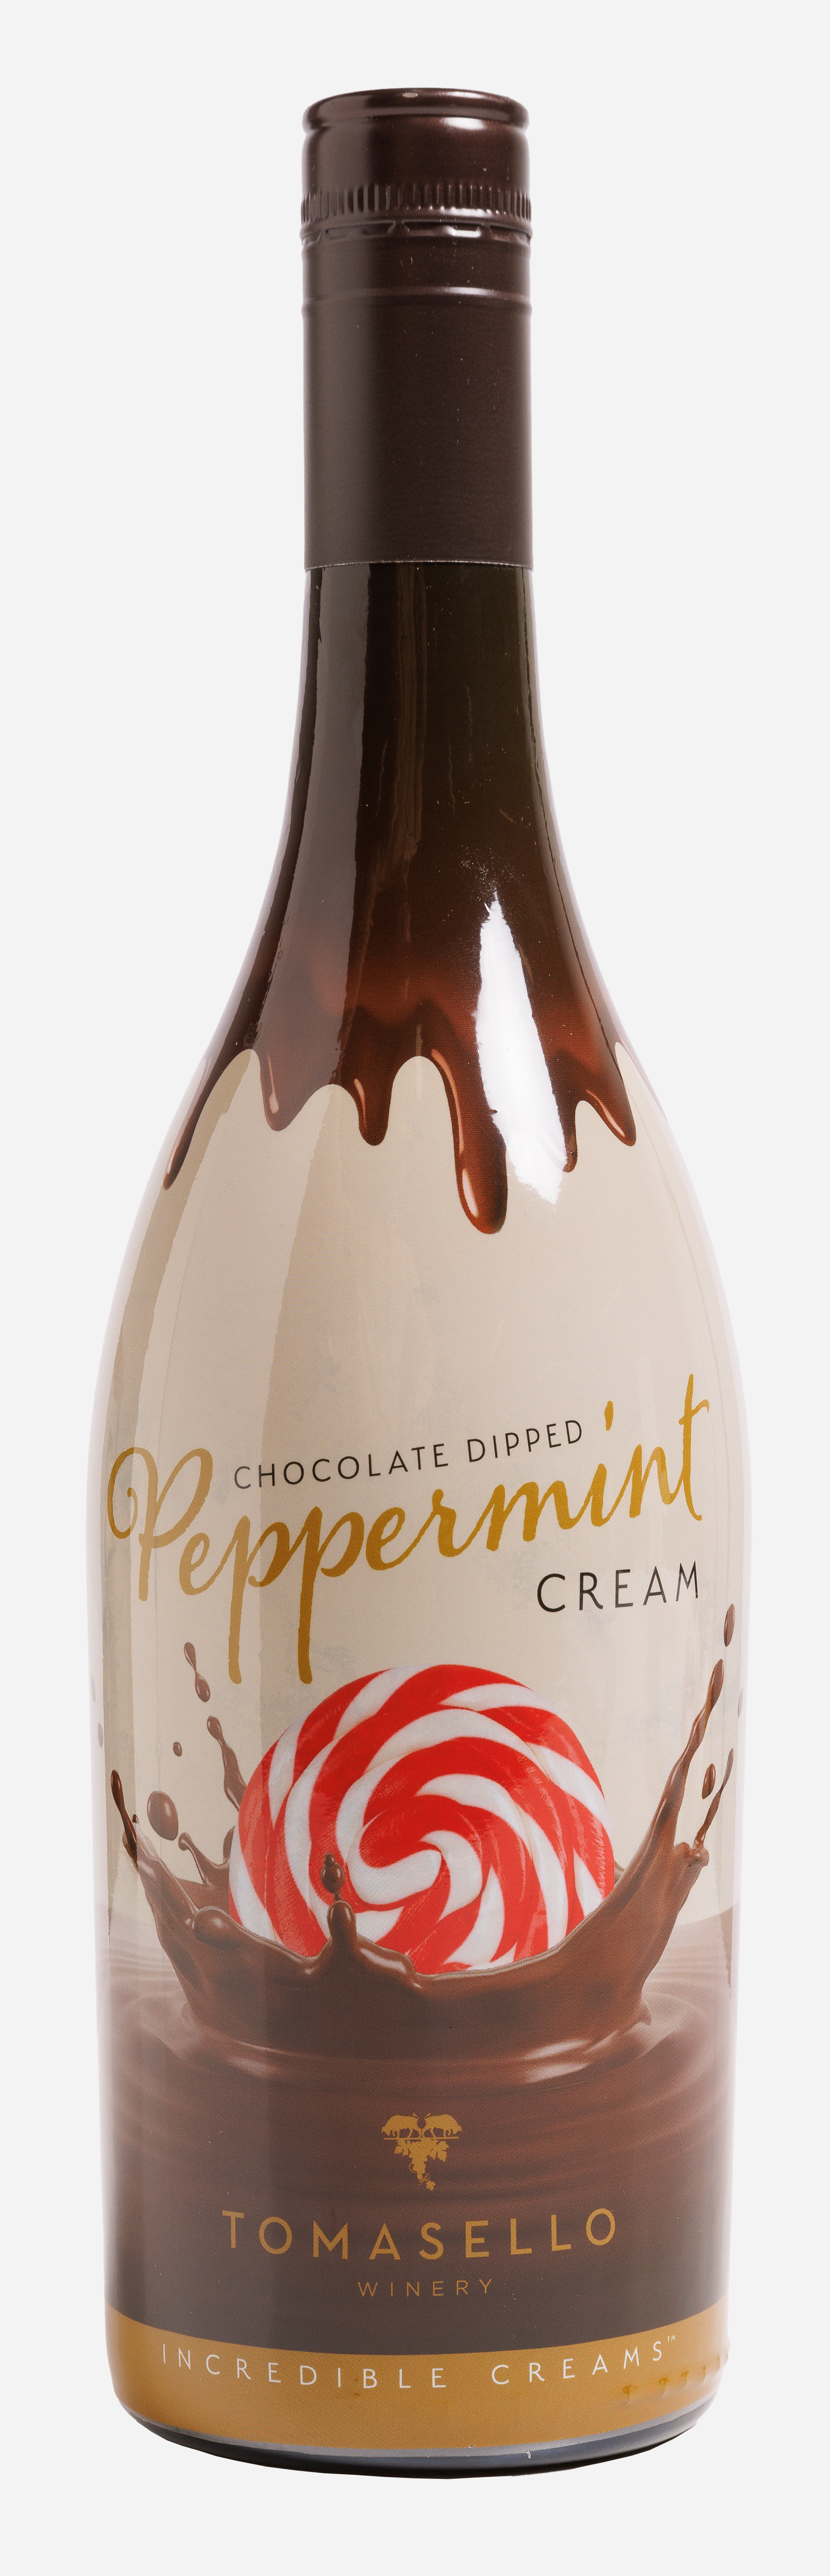 Product Image for Tomasello Chocolate Dipped Peppermint Cream- Incredible Creams LIMITED RELEASE